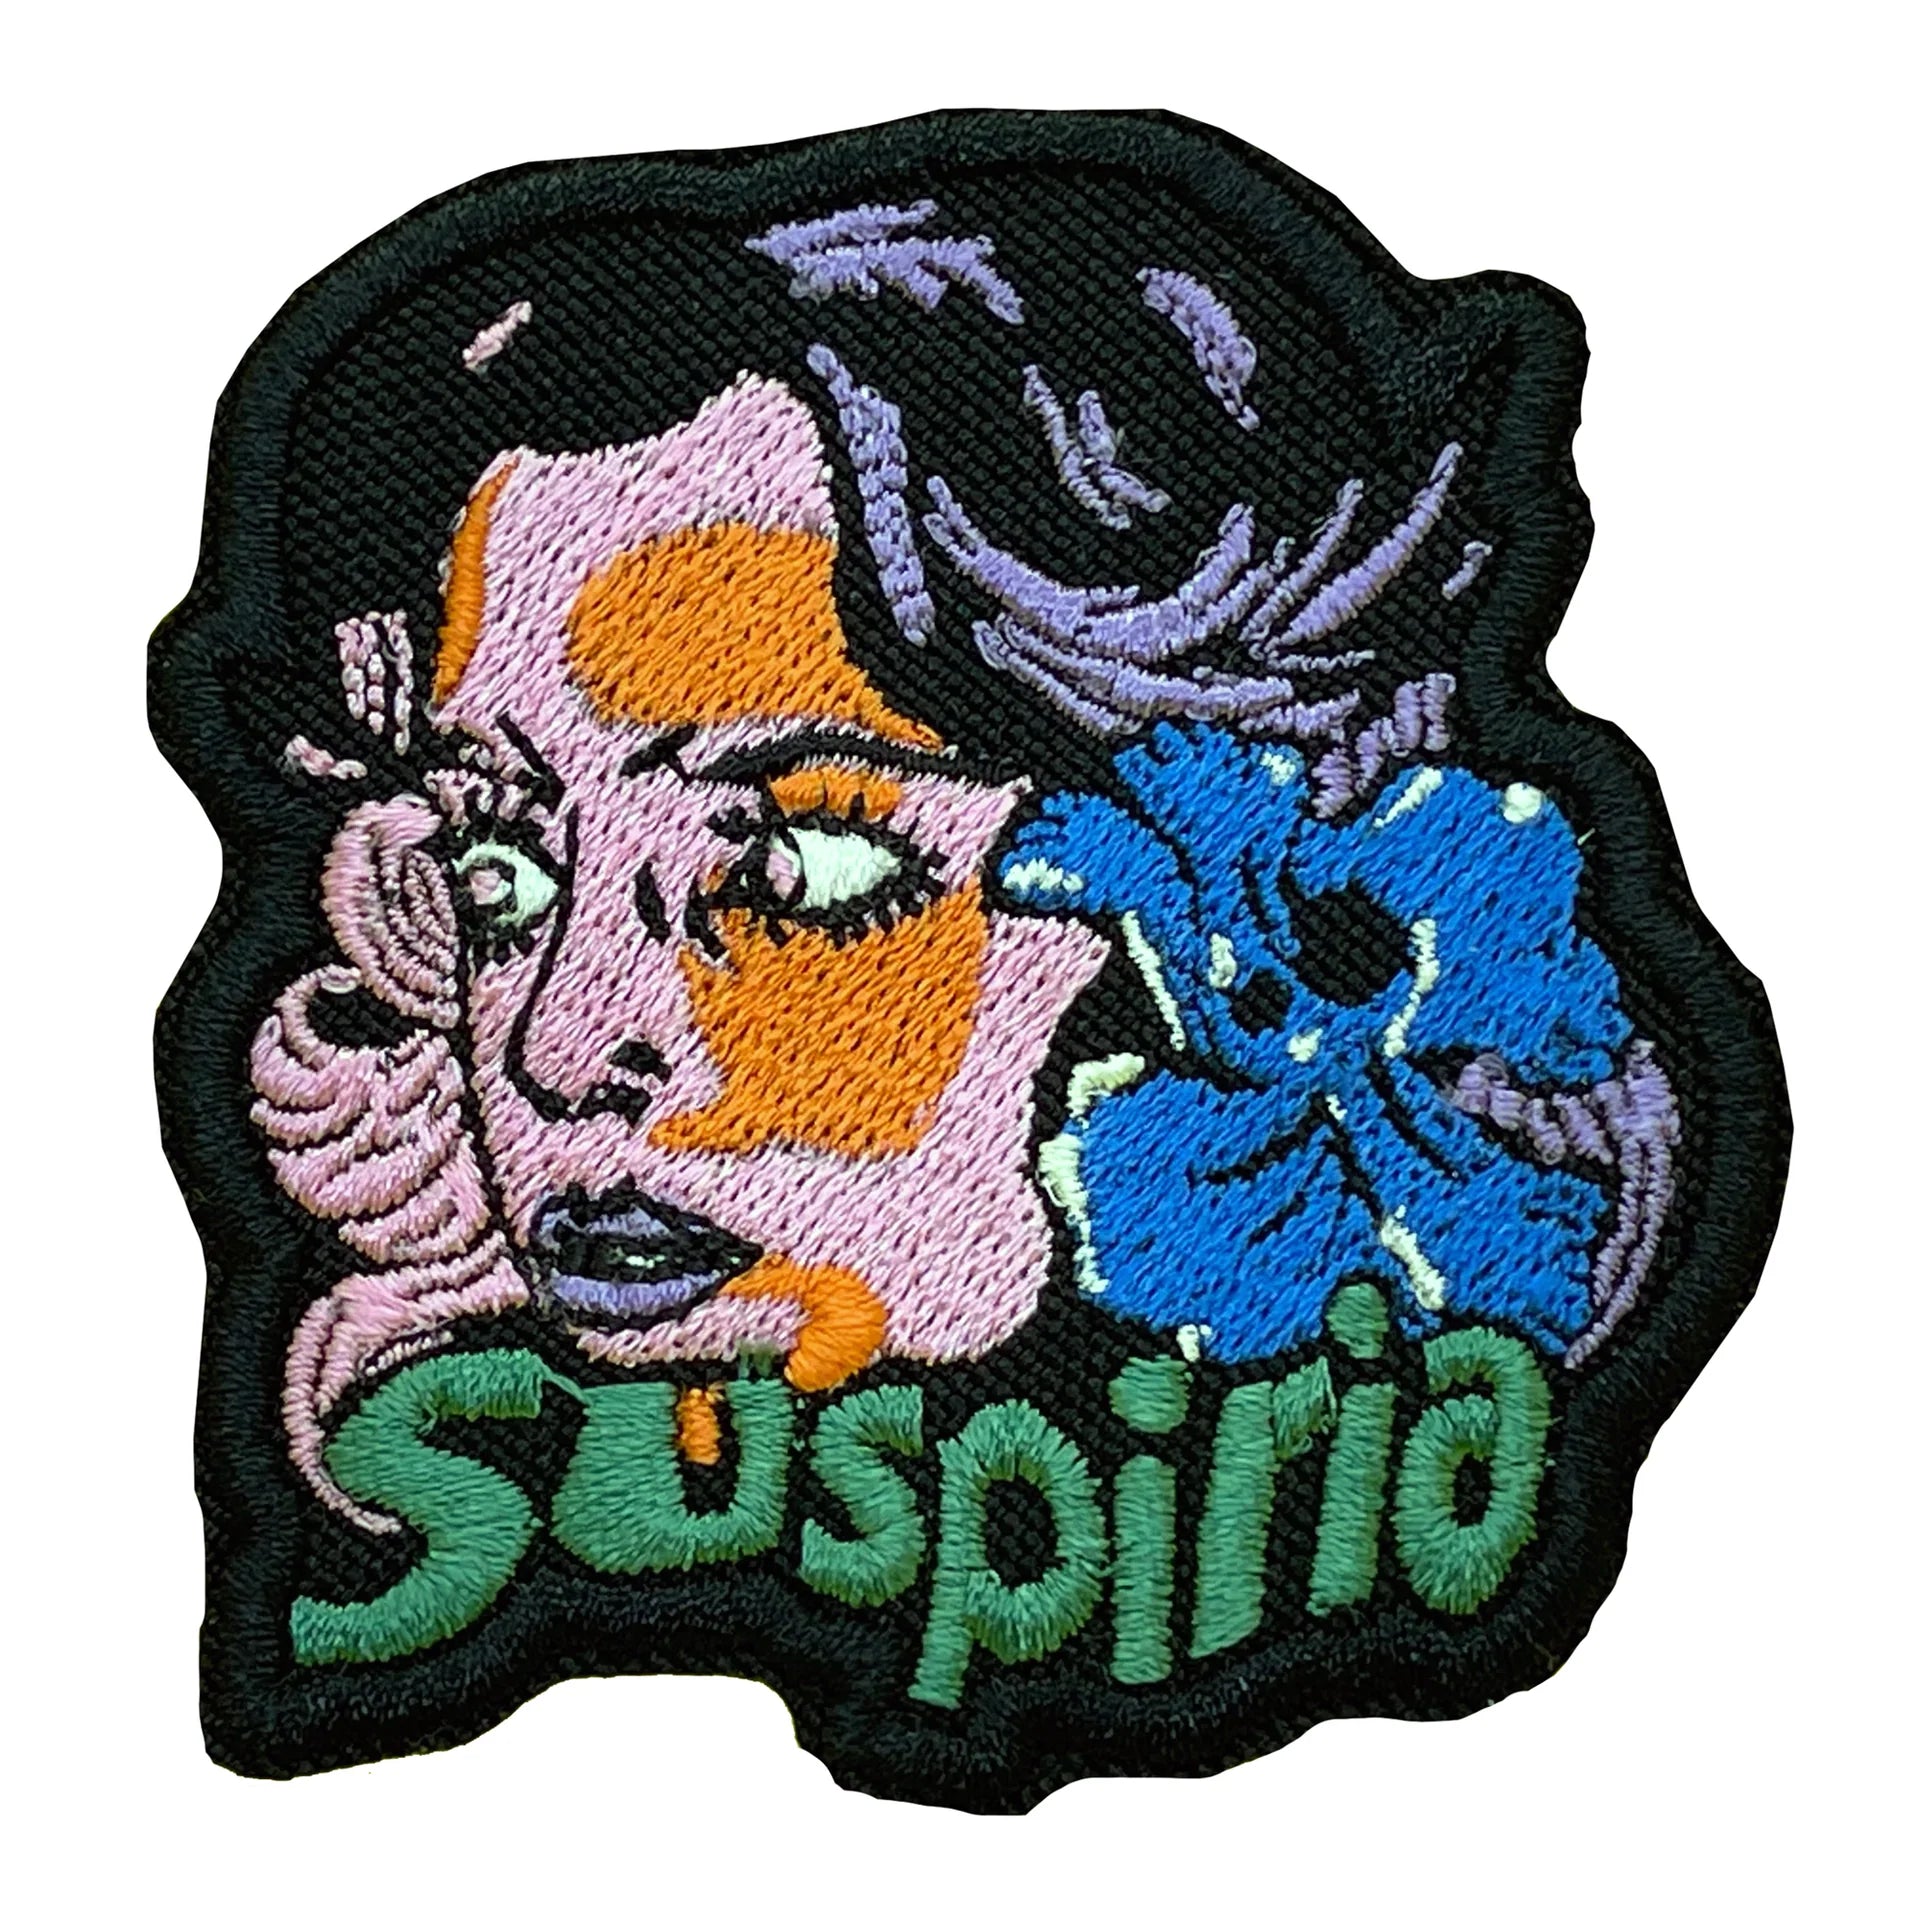 An embroidered patch of the lead character Suzy with the infamous blue Iris in her hair, from Dario Argento's 1977 Italian horror film Suspiria.